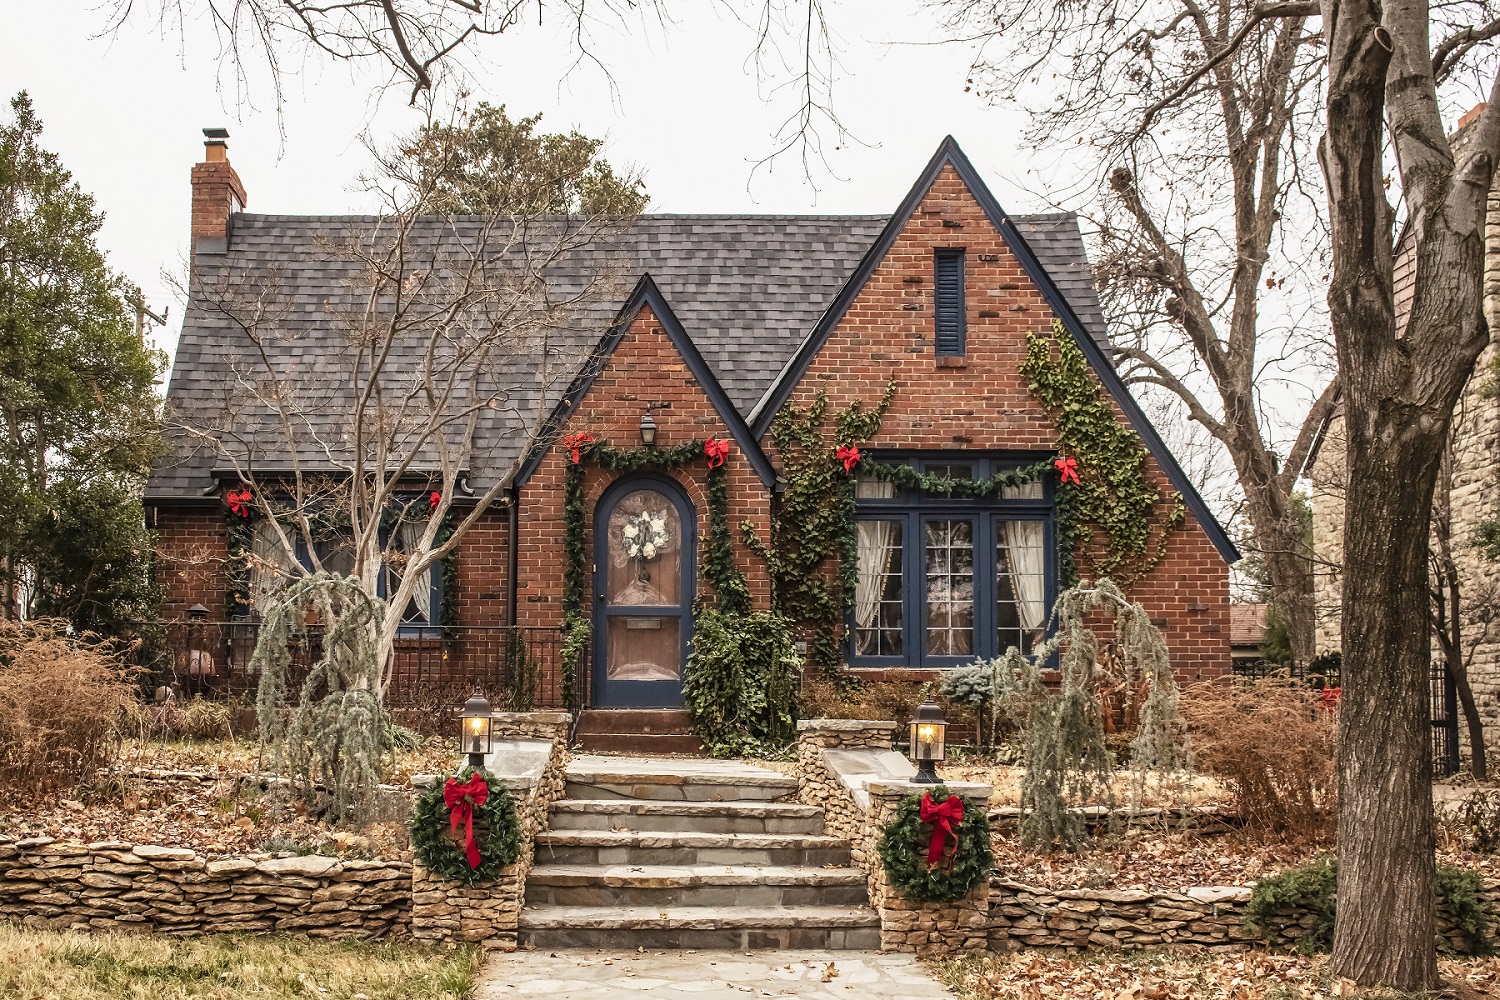 Cute brick cottage with red bows and greenery